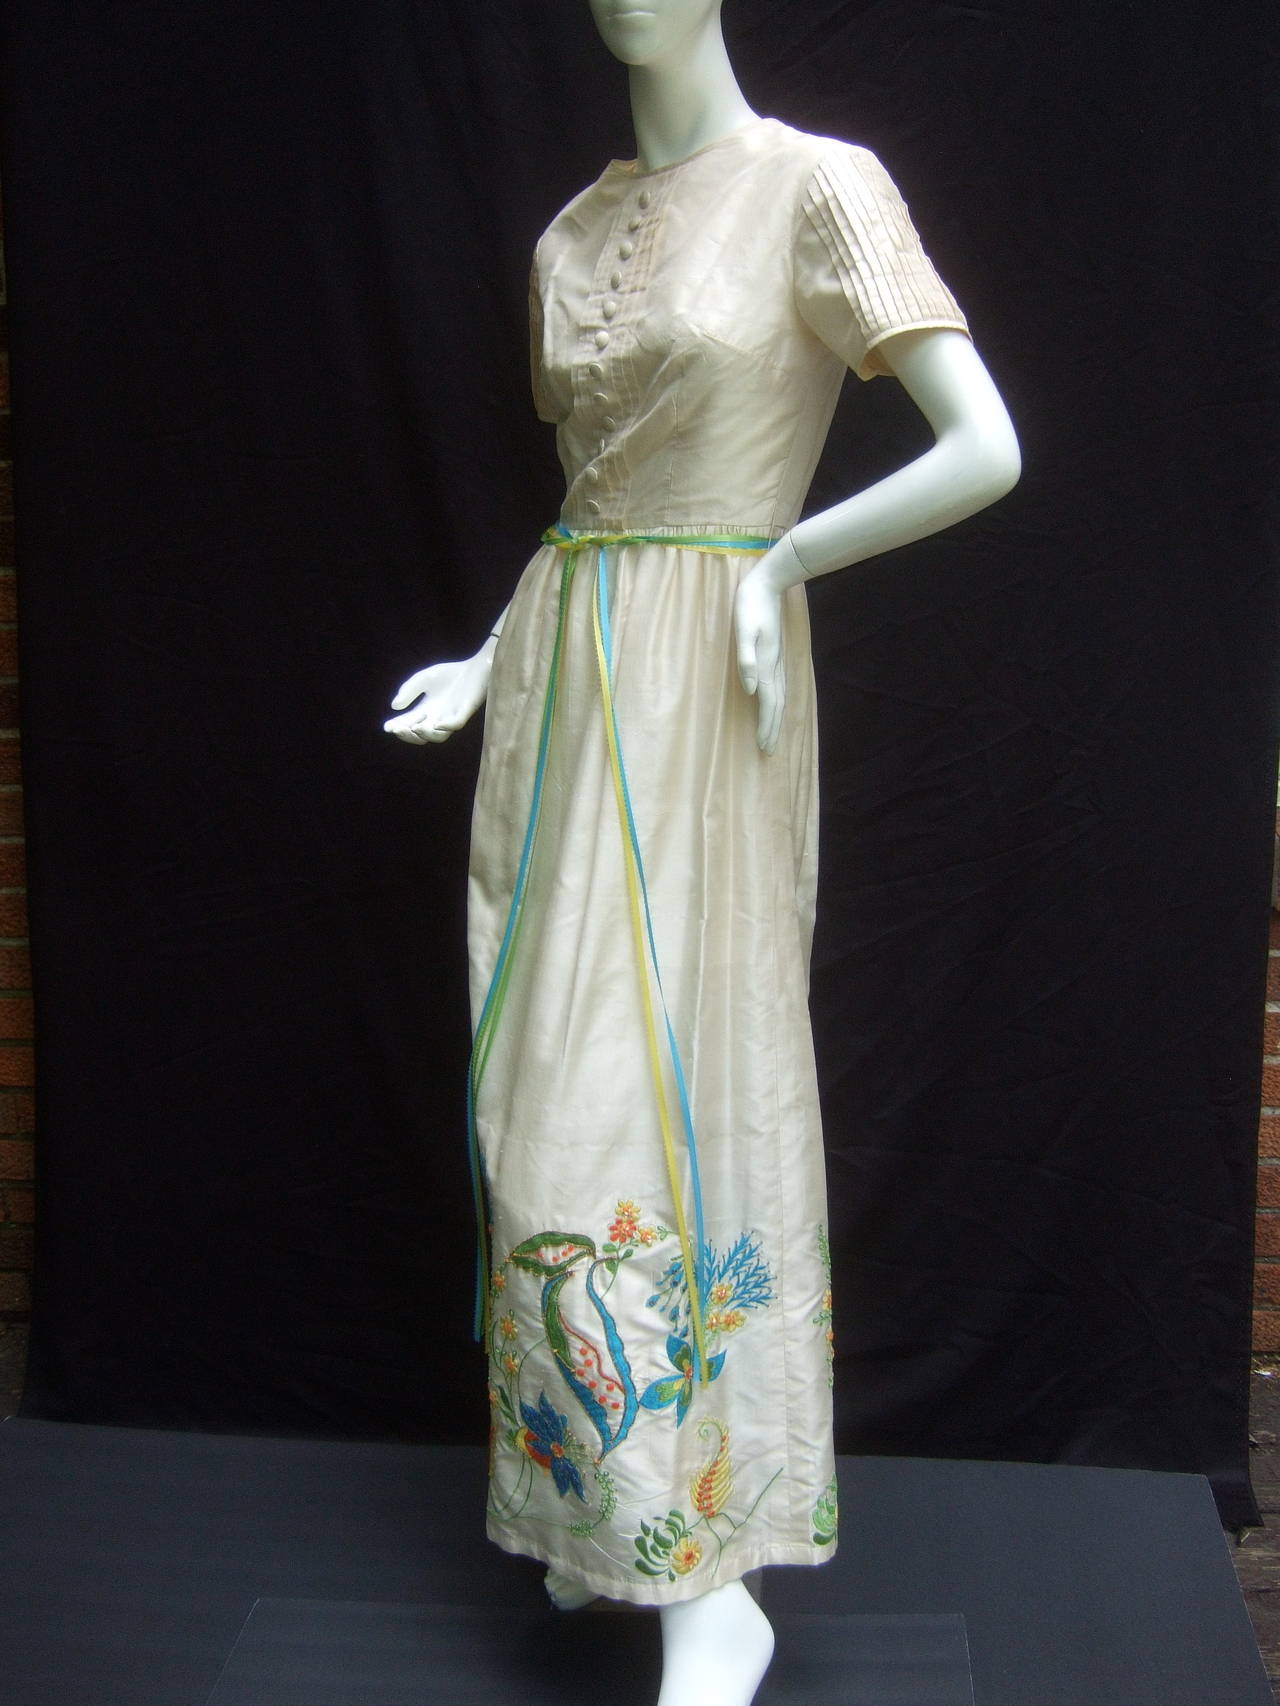 Exotic oyster silk embroidered gown from India for Bonwit Teller c 1970
The elegant vintage silk gown is embellished with elaborate 
floral embroidery that circles the hemline

The intricate embroidered flowers are accented with small
glass beading